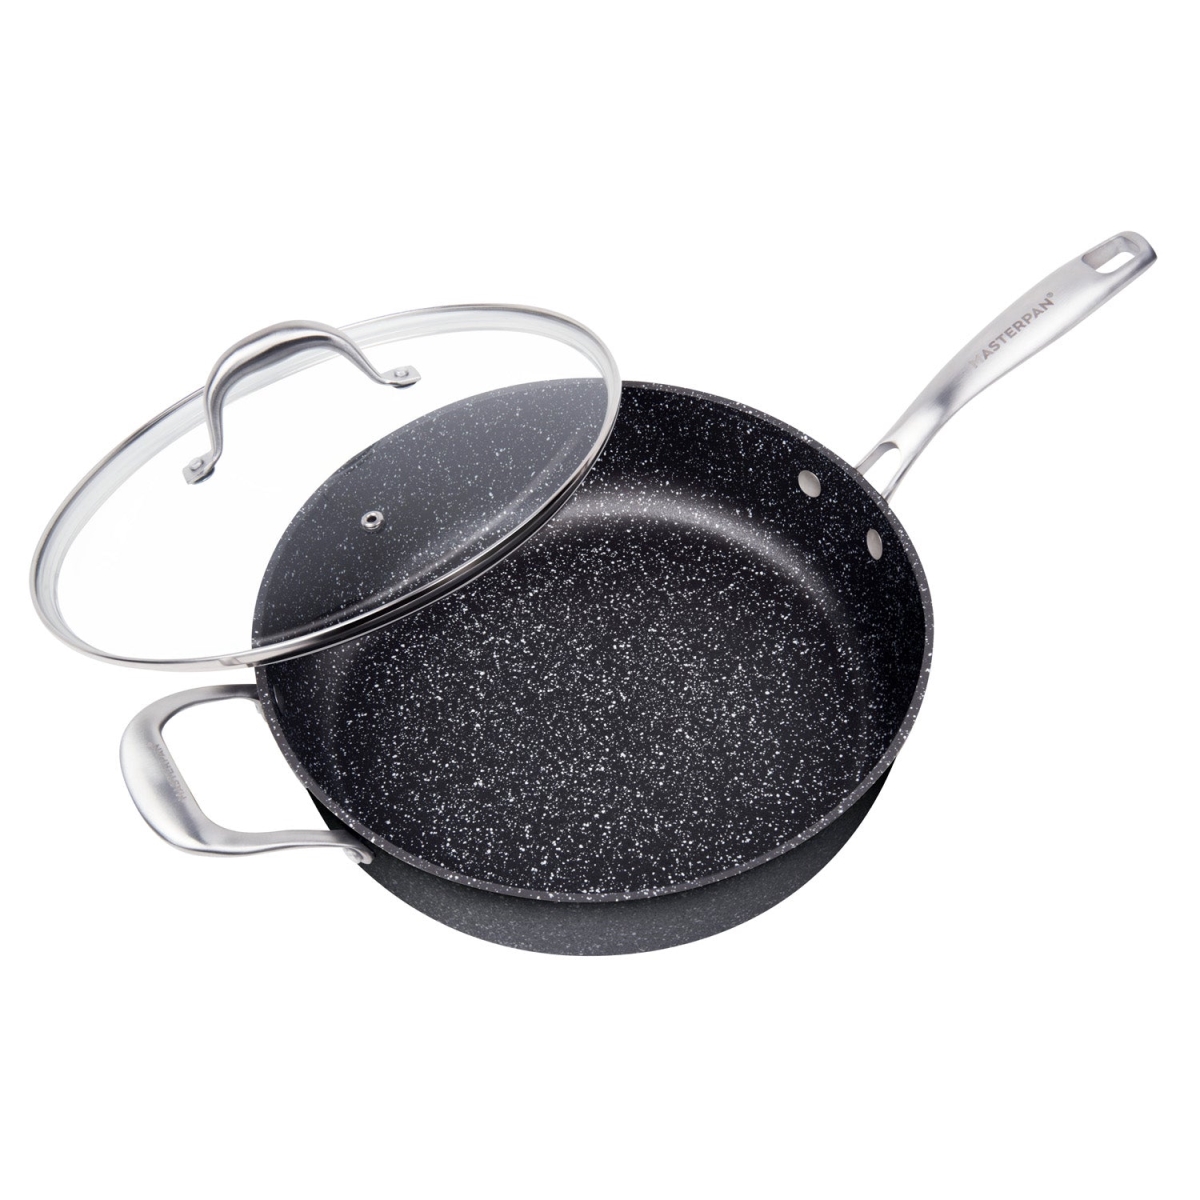 Picture of Masterpan MP-134 5 qt. x 11 in. Non-Stick Cast Aluminum Granite Look Saute Pan with Glass Lid